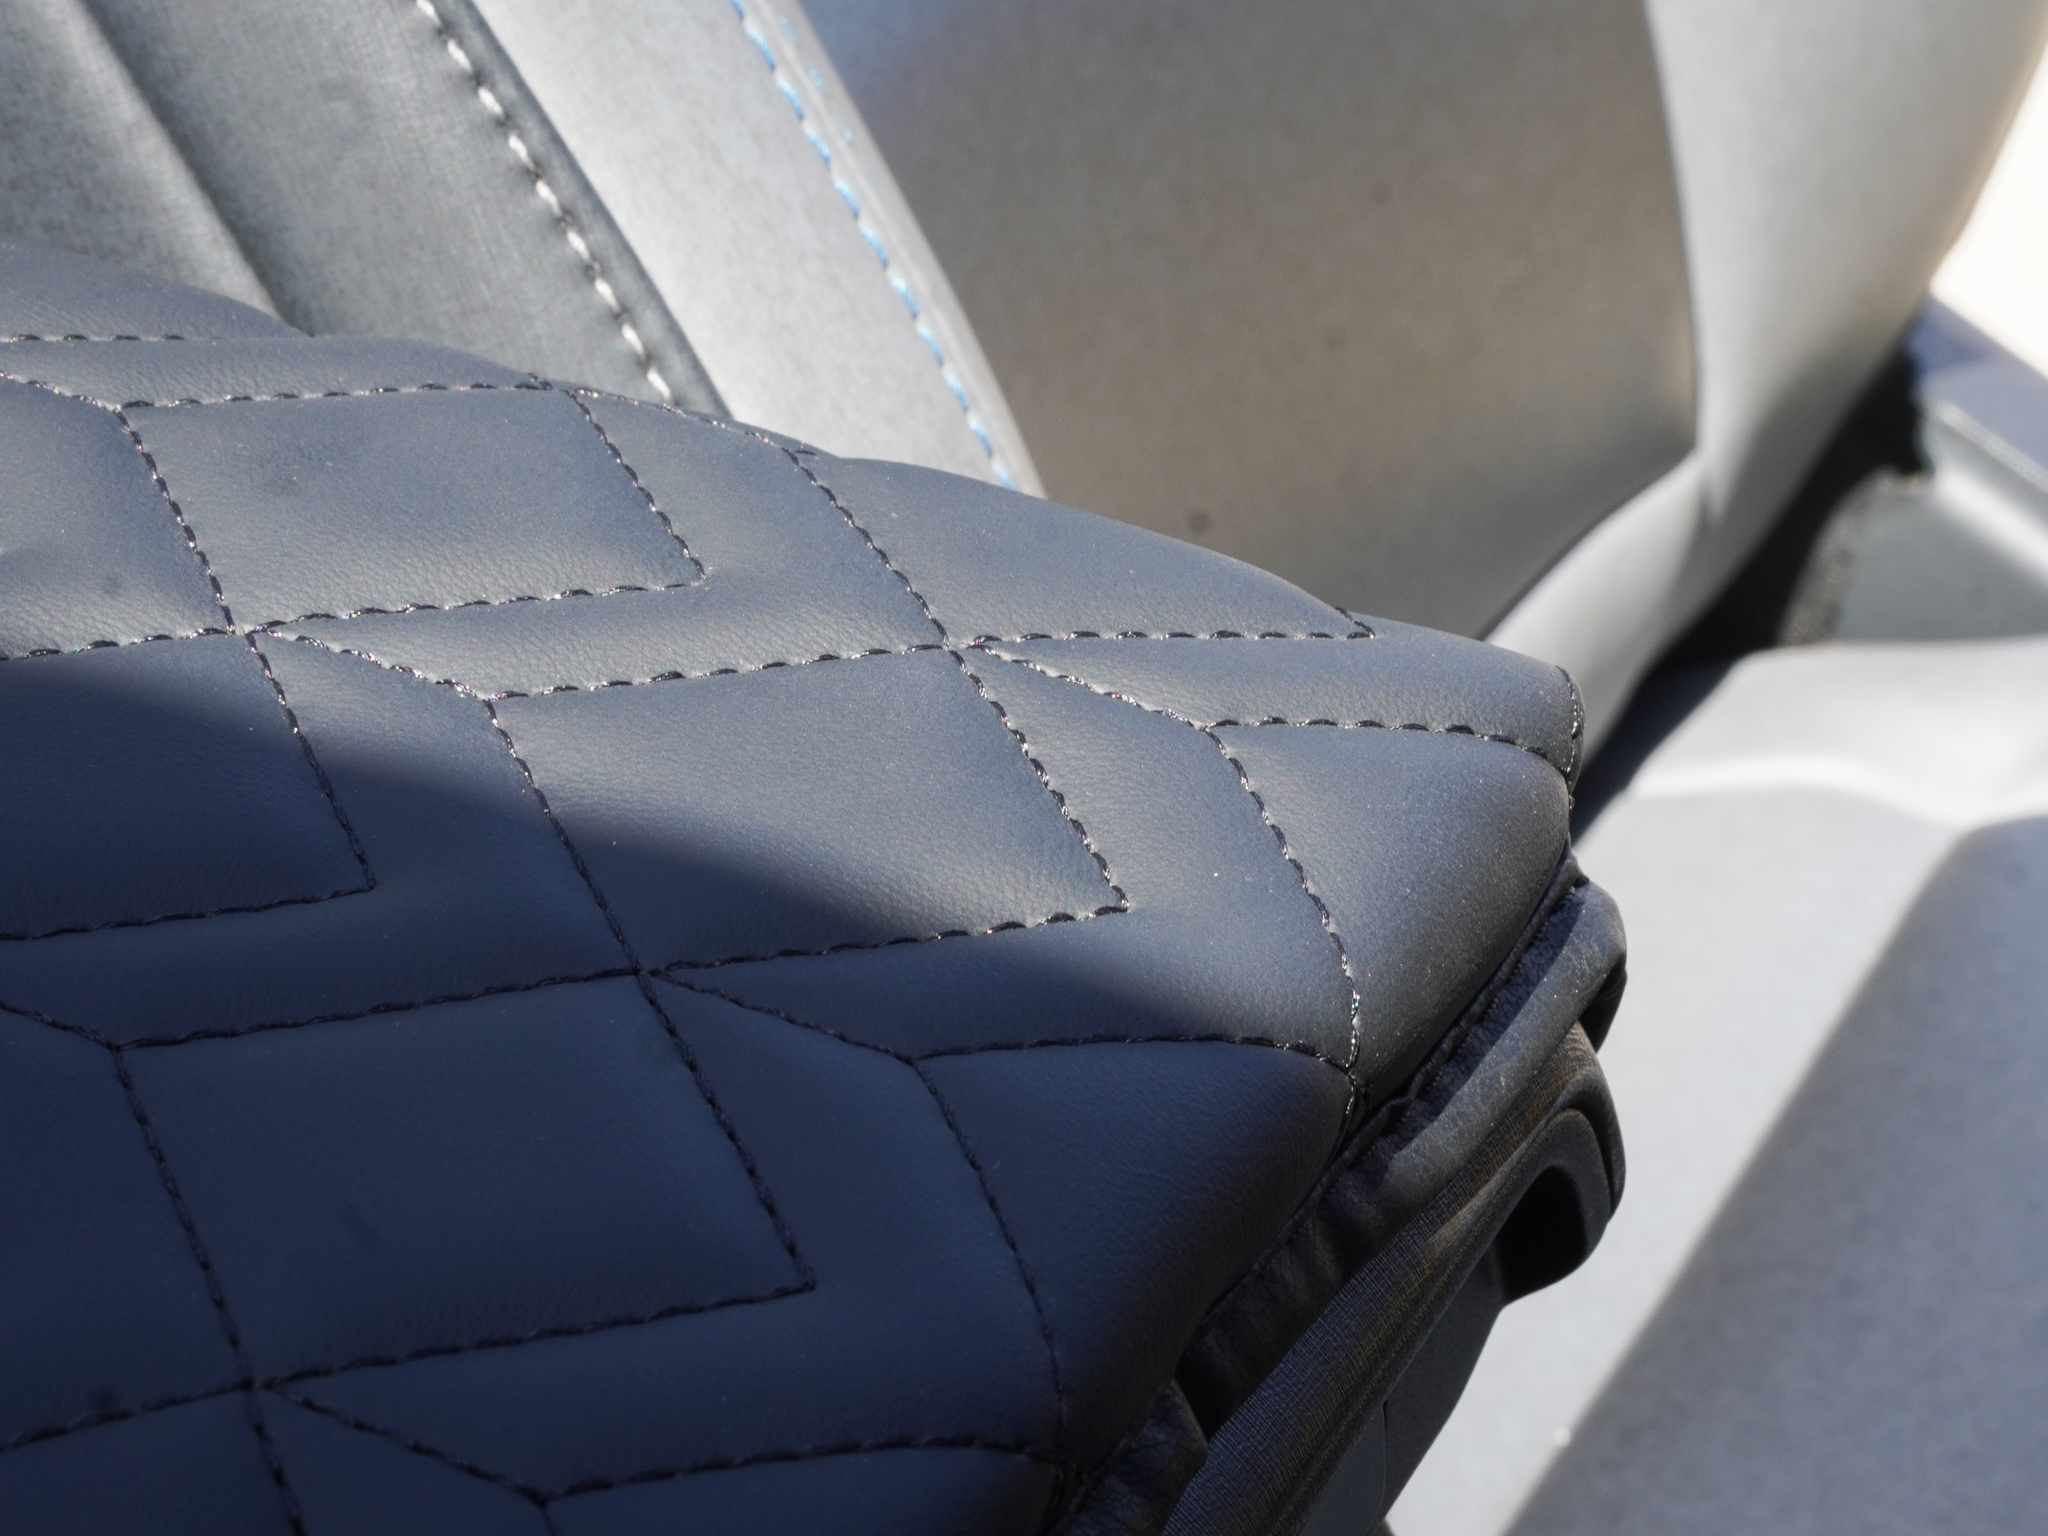 Ford Bronco Armrest Cover - EcoLeather - Arrow Pattern